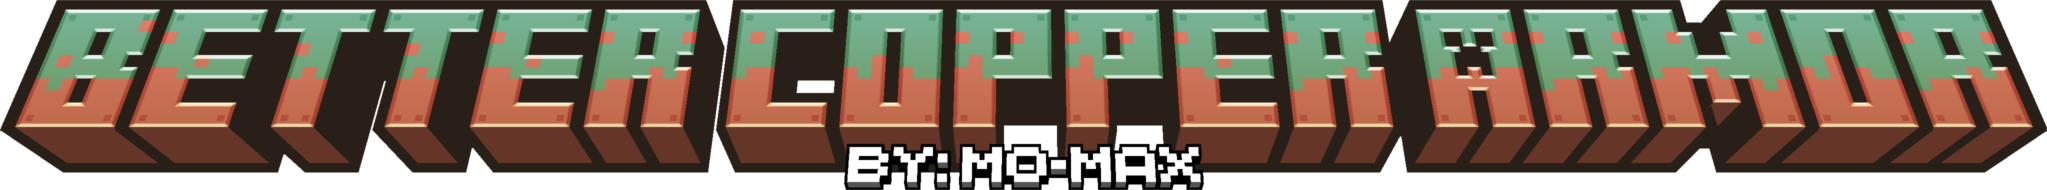 Title image that says Better Copper Armor by Momax in Minecraft Font